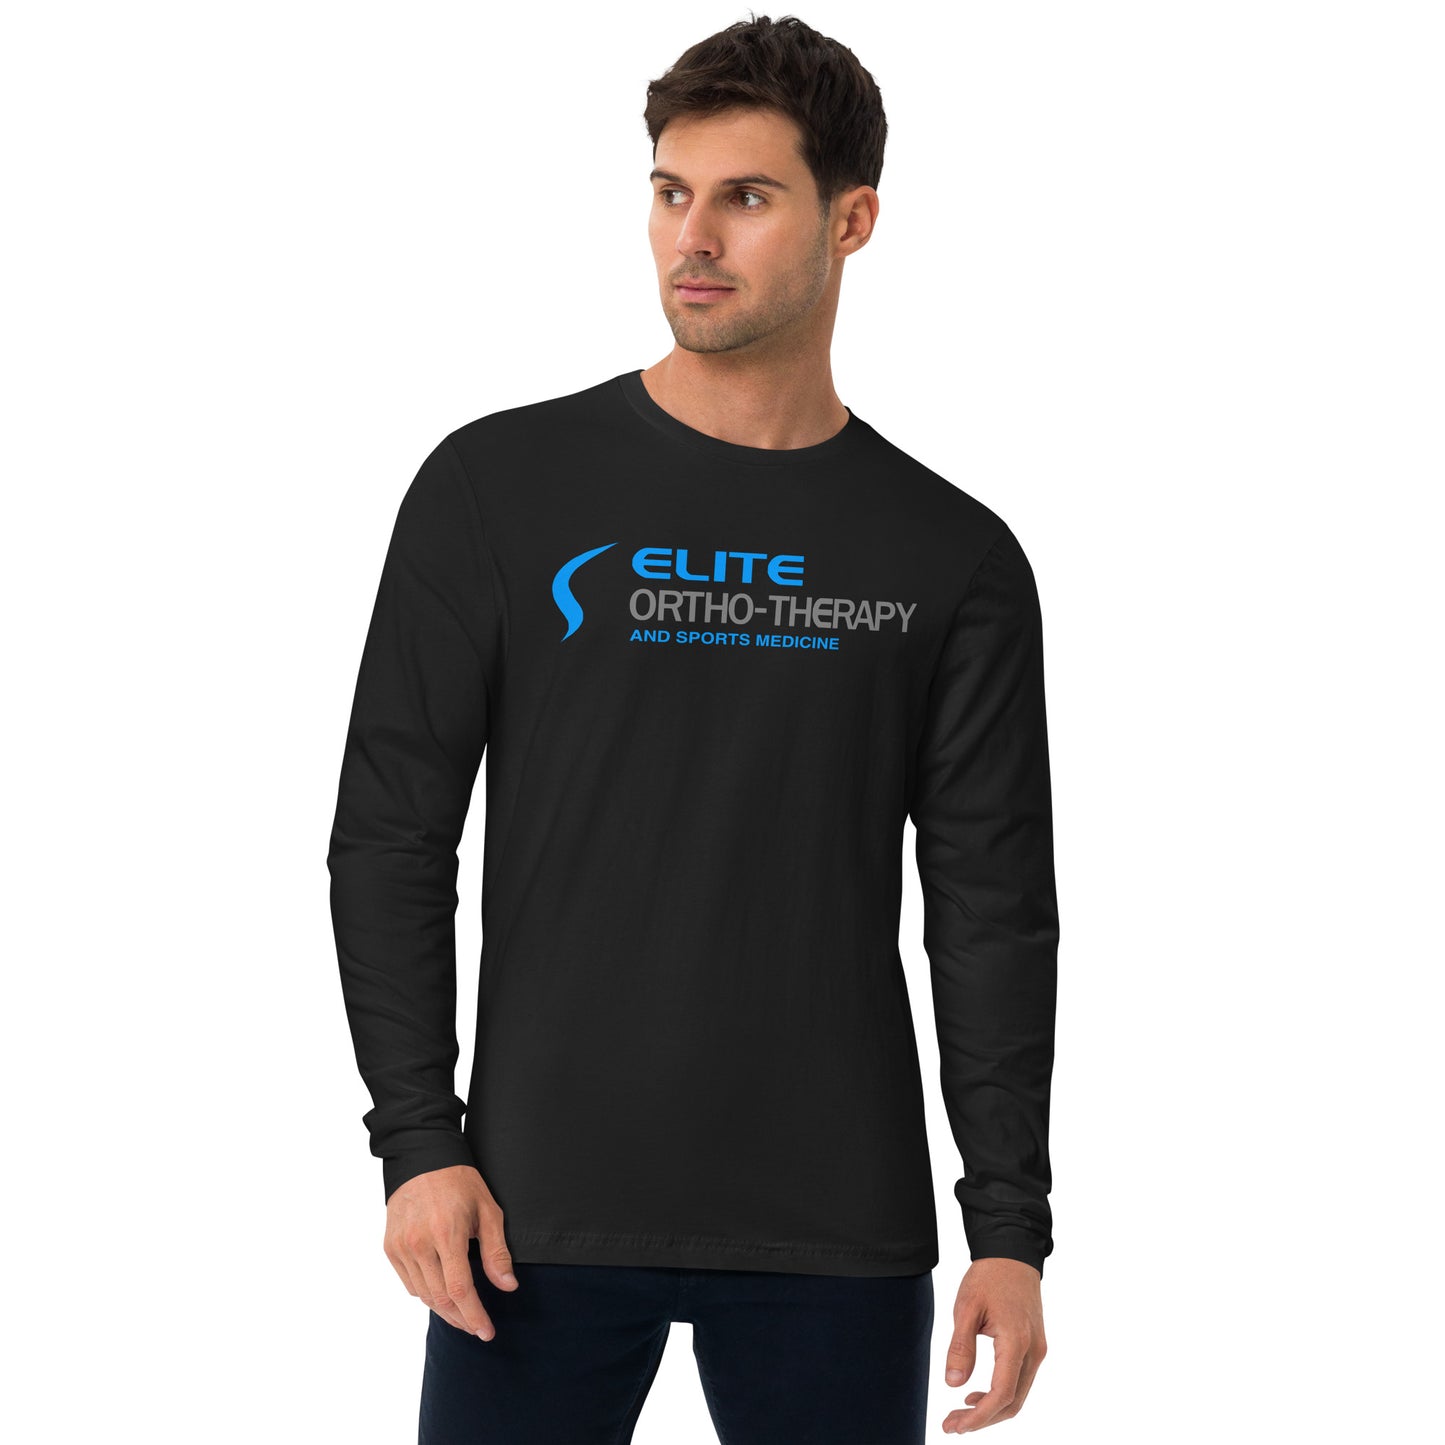 Mens Long Sleeve Fitted Crew